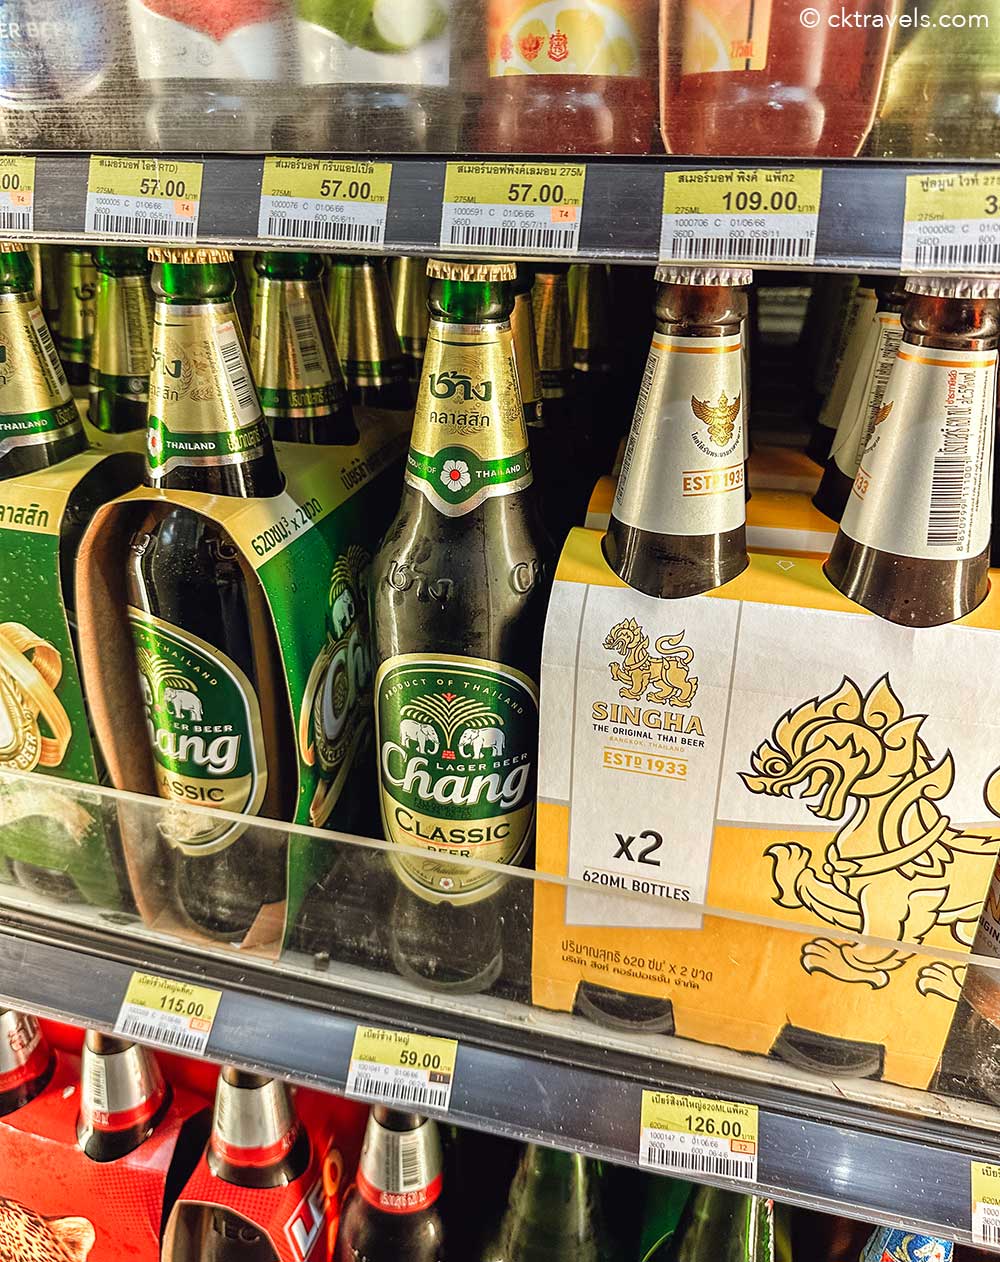 7-Eleven Thailand Beer singha and chang